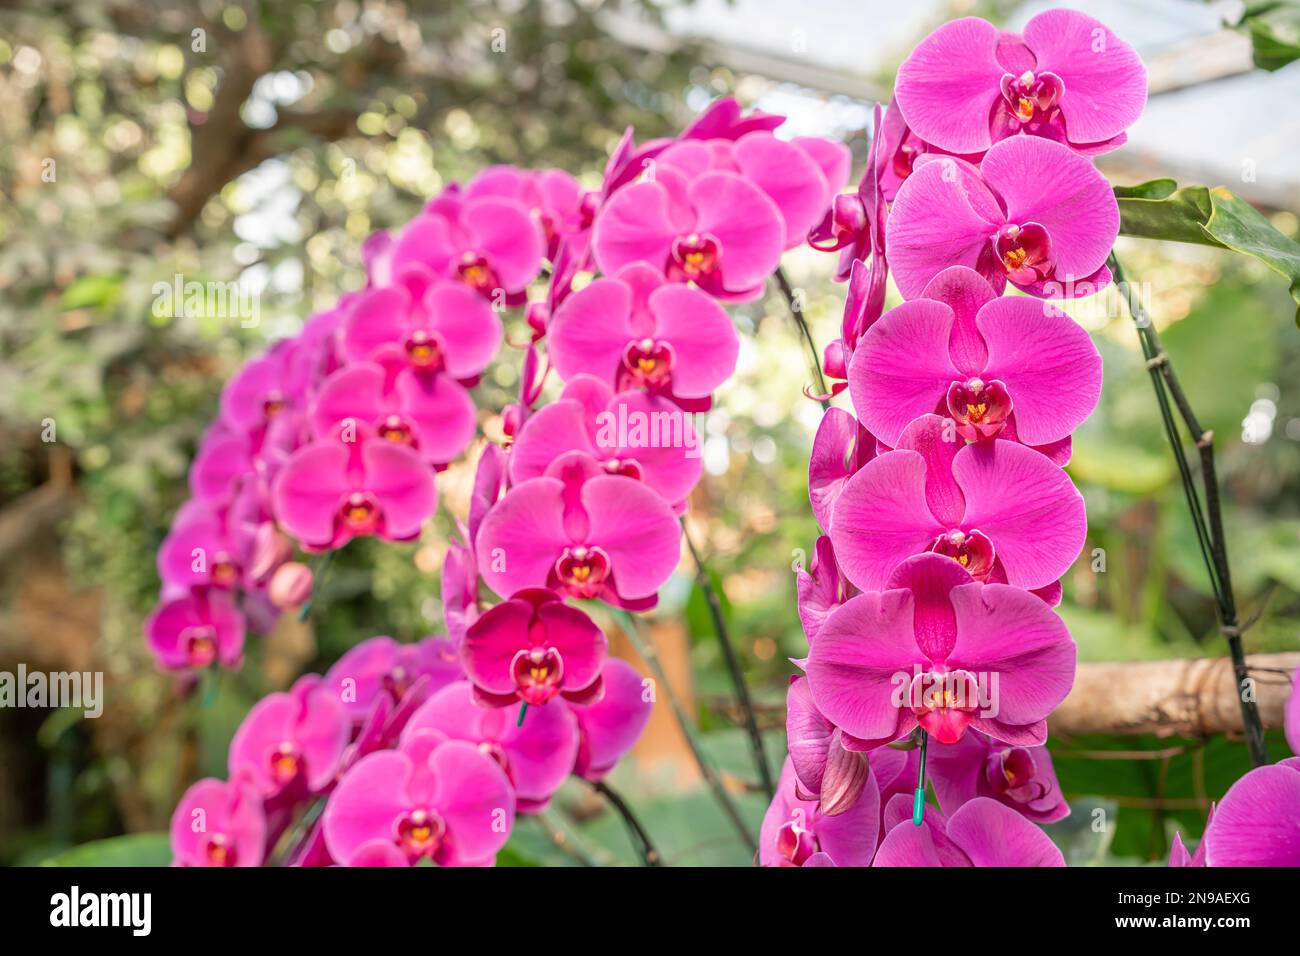 Violet phalaenopsis or Moth orchid from family Orchidaceae in orchid farm. Stock Photo